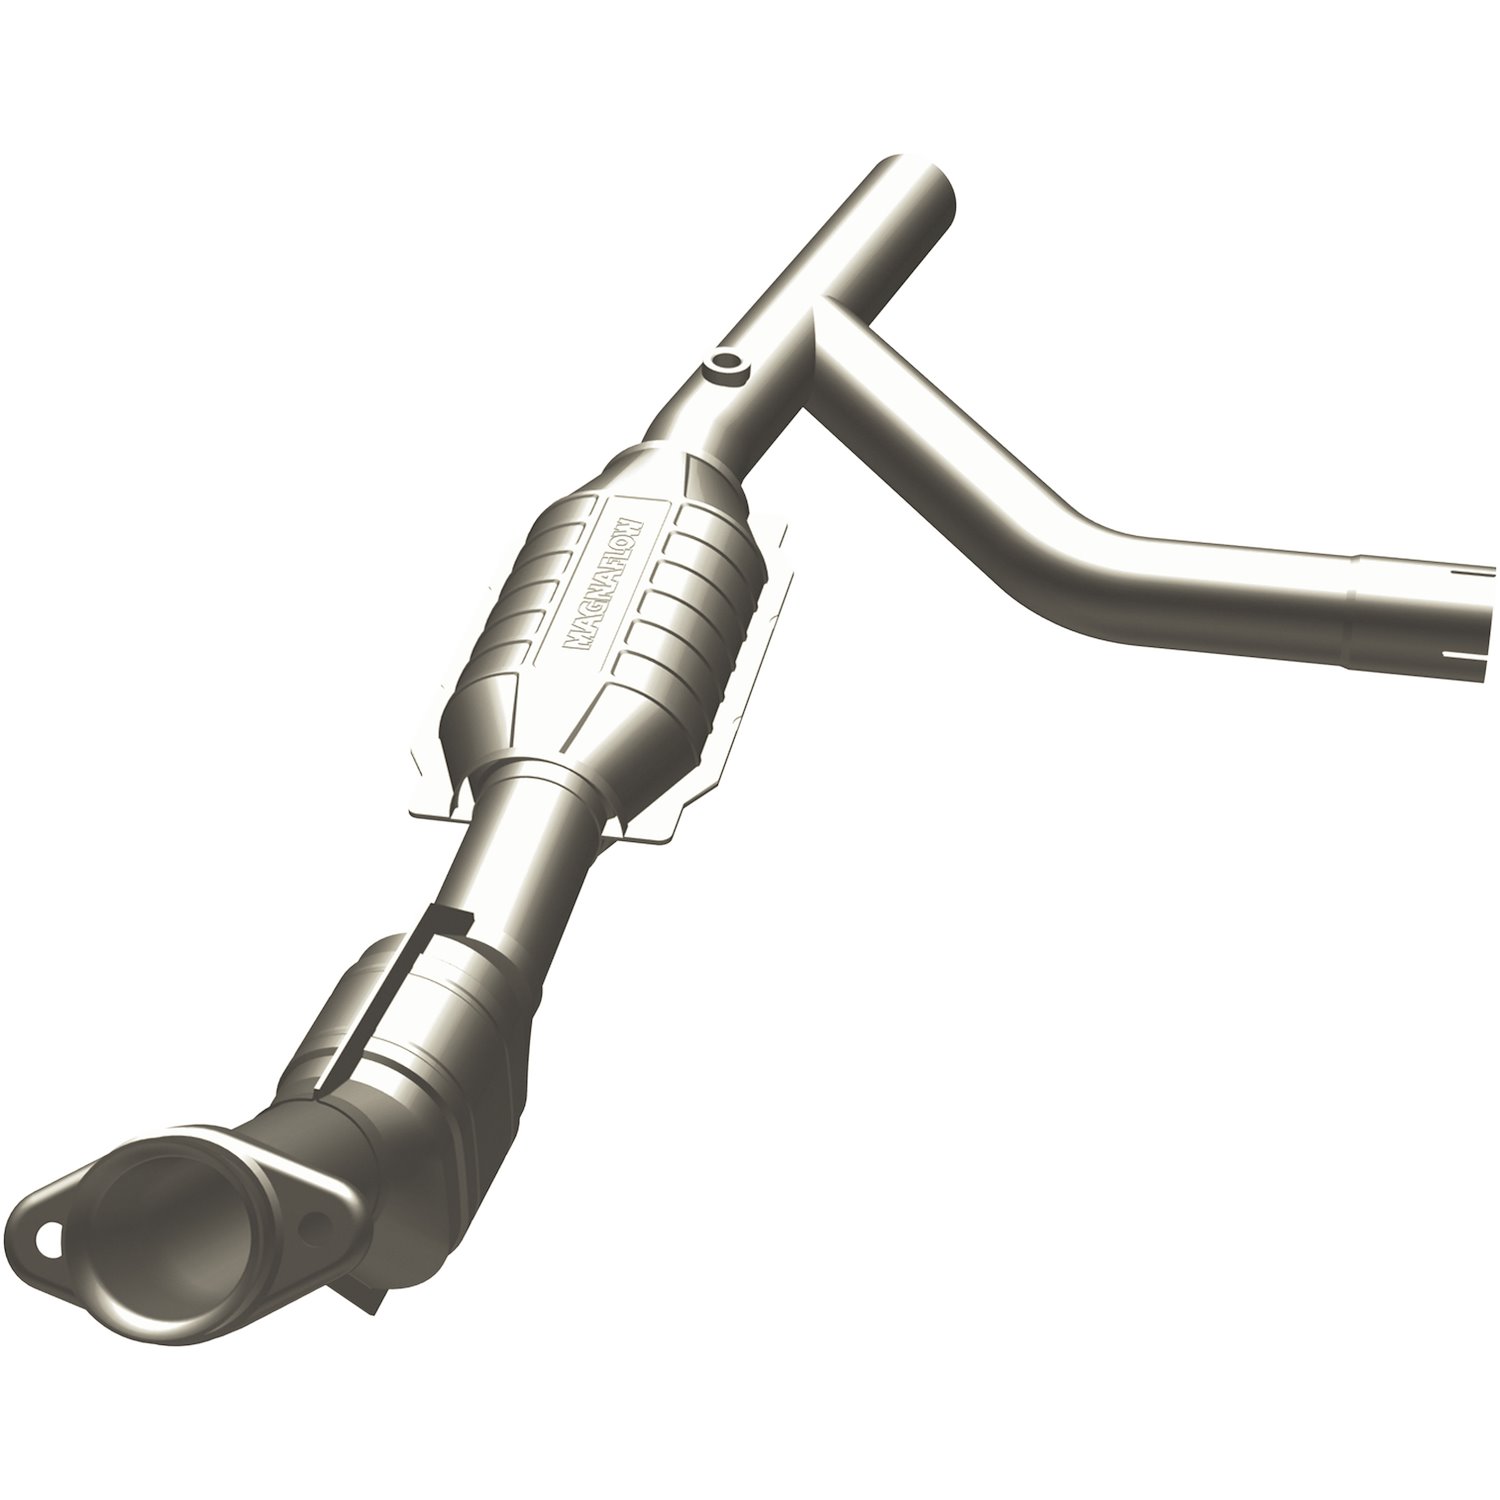 California Grade CARB Compliant Direct-Fit Catalytic Converter